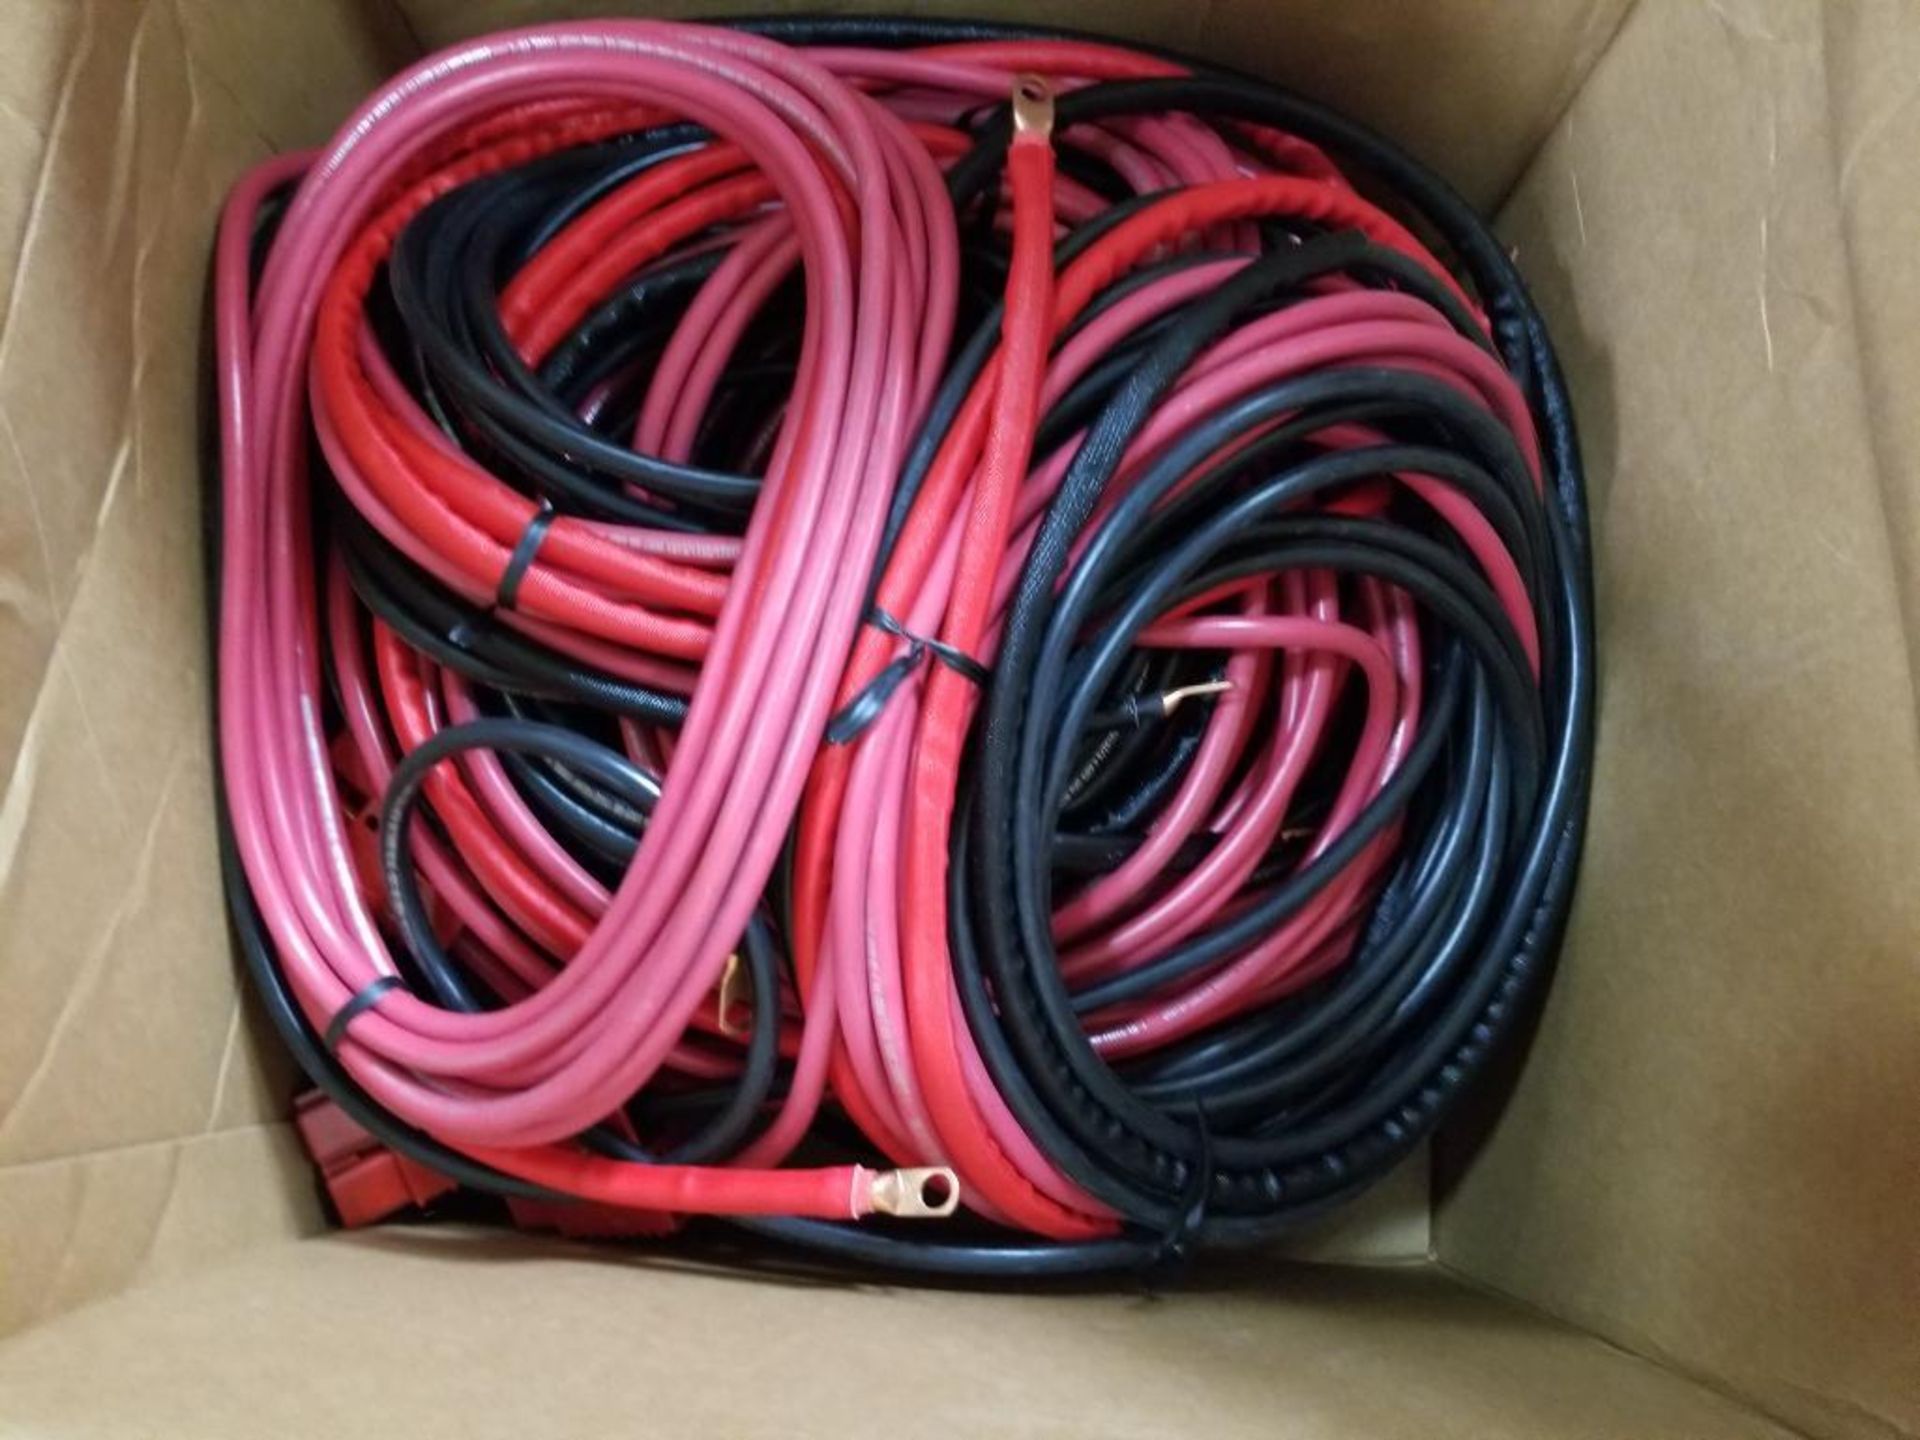 Qty 15 - Anderson 23ft battery adapter cable. RBARA23FT4-G1. 175A, 600V plug. New in box. - Image 2 of 5